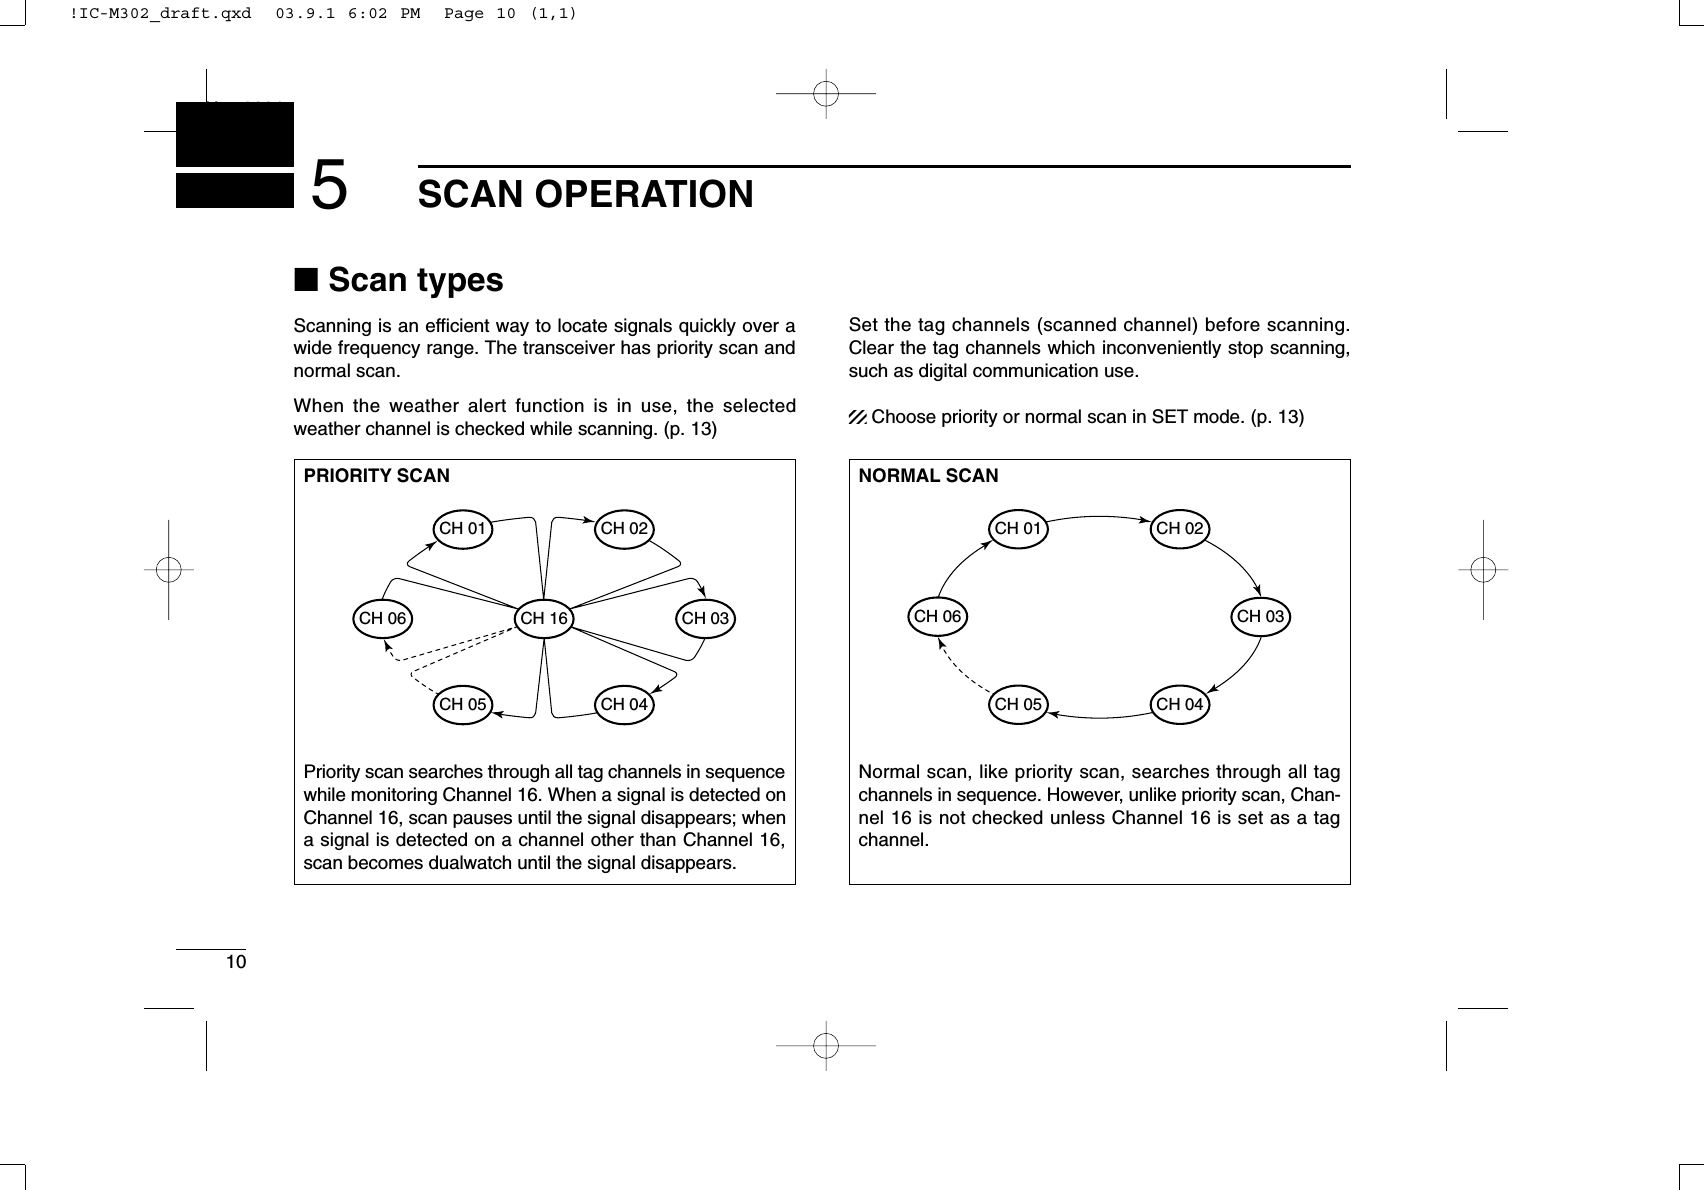 10SCAN OPERATIONNew20015■Scan typesScanning is an efﬁcient way to locate signals quickly over awide frequency range. The transceiver has priority scan andnormal scan.When the weather alert function is in use, the selectedweather channel is checked while scanning. (p. 13)Set the tag channels (scanned channel) before scanning.Clear the tag channels which inconveniently stop scanning,such as digital communication use.Choose priority or normal scan in SET mode. (p. 13)PRIORITY SCANPriority scan searches through all tag channels in sequencewhile monitoring Channel 16. When a signal is detected onChannel 16, scan pauses until the signal disappears; whena signal is detected on a channel other than Channel 16,scan becomes dualwatch until the signal disappears.CH 06CH 01CH 16CH 02CH 05 CH 04CH 03NORMAL SCANNormal scan, like priority scan, searches through all tagchannels in sequence. However, unlike priority scan, Chan-nel 16 is not checked unless Channel 16 is set as a tagchannel.CH 01 CH 02CH 06CH 05 CH 04CH 03!IC-M302_draft.qxd  03.9.1 6:02 PM  Page 10 (1,1)